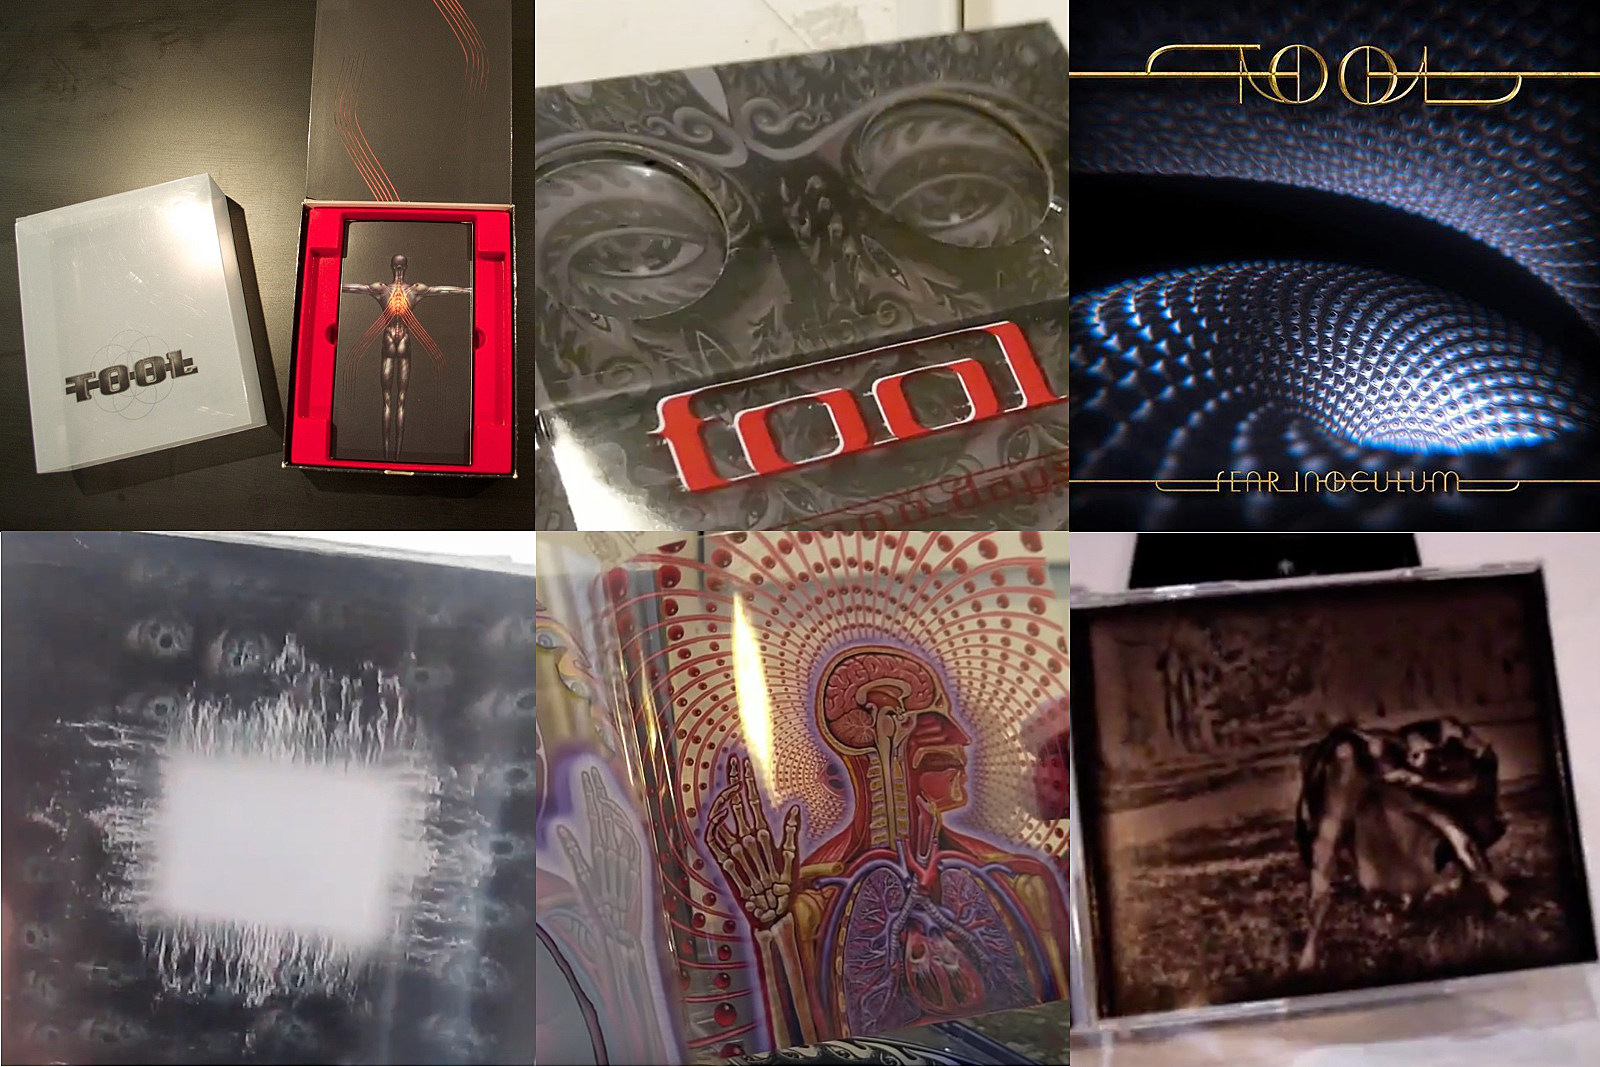 tool aenima album and download purchase